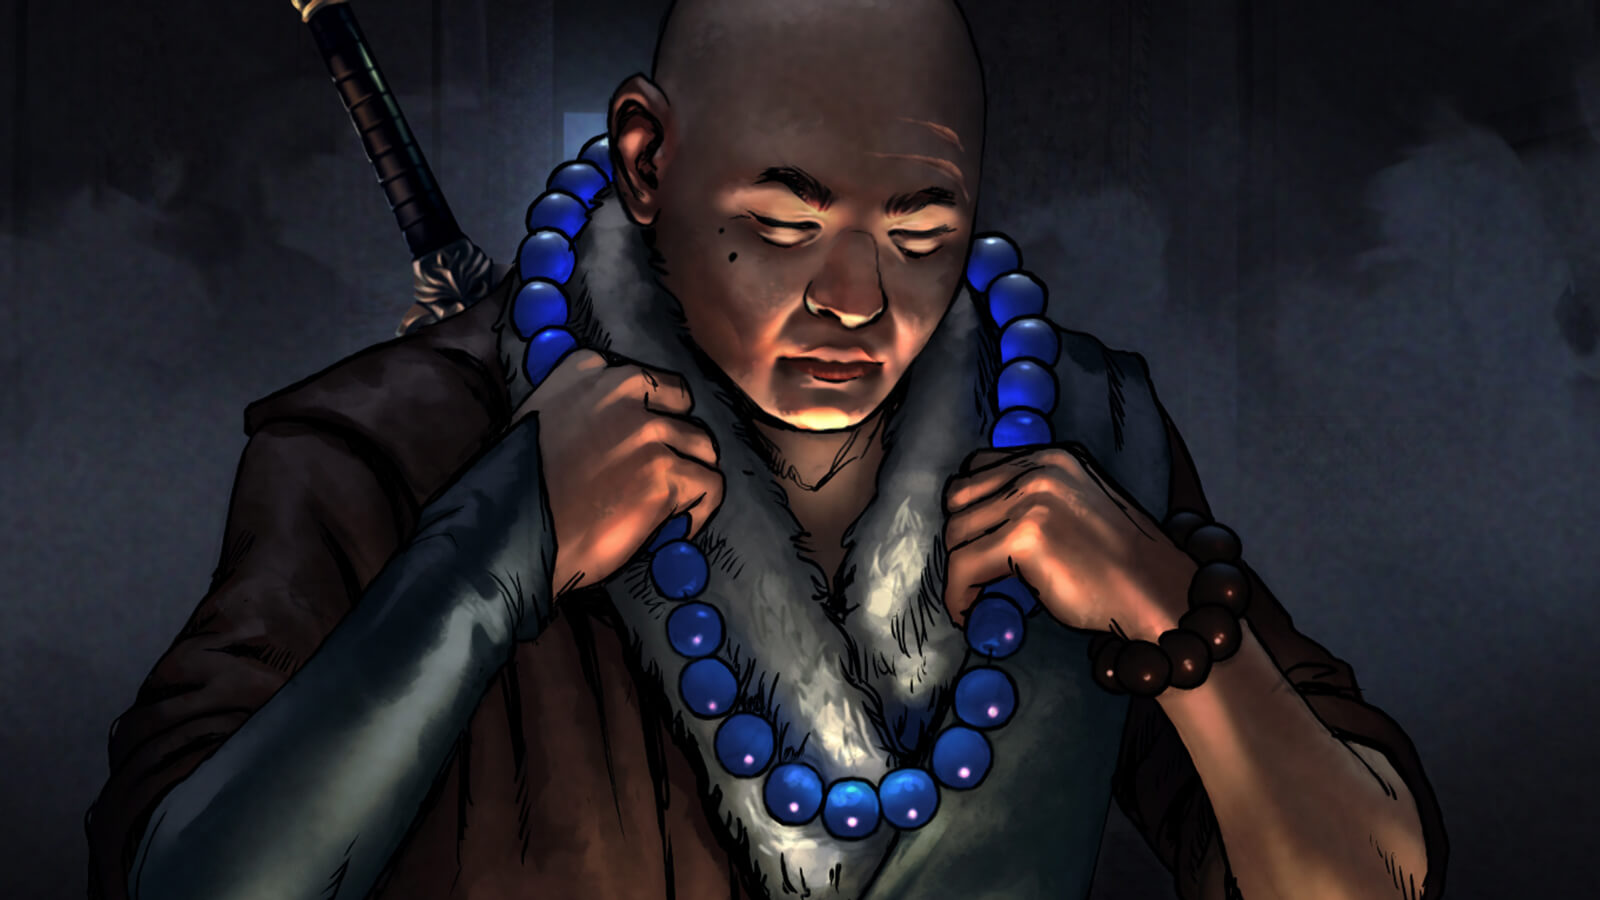 A bald man with a sword on his back, lit from below, puts on a necklace of brilliant blue spheres in a darkened room